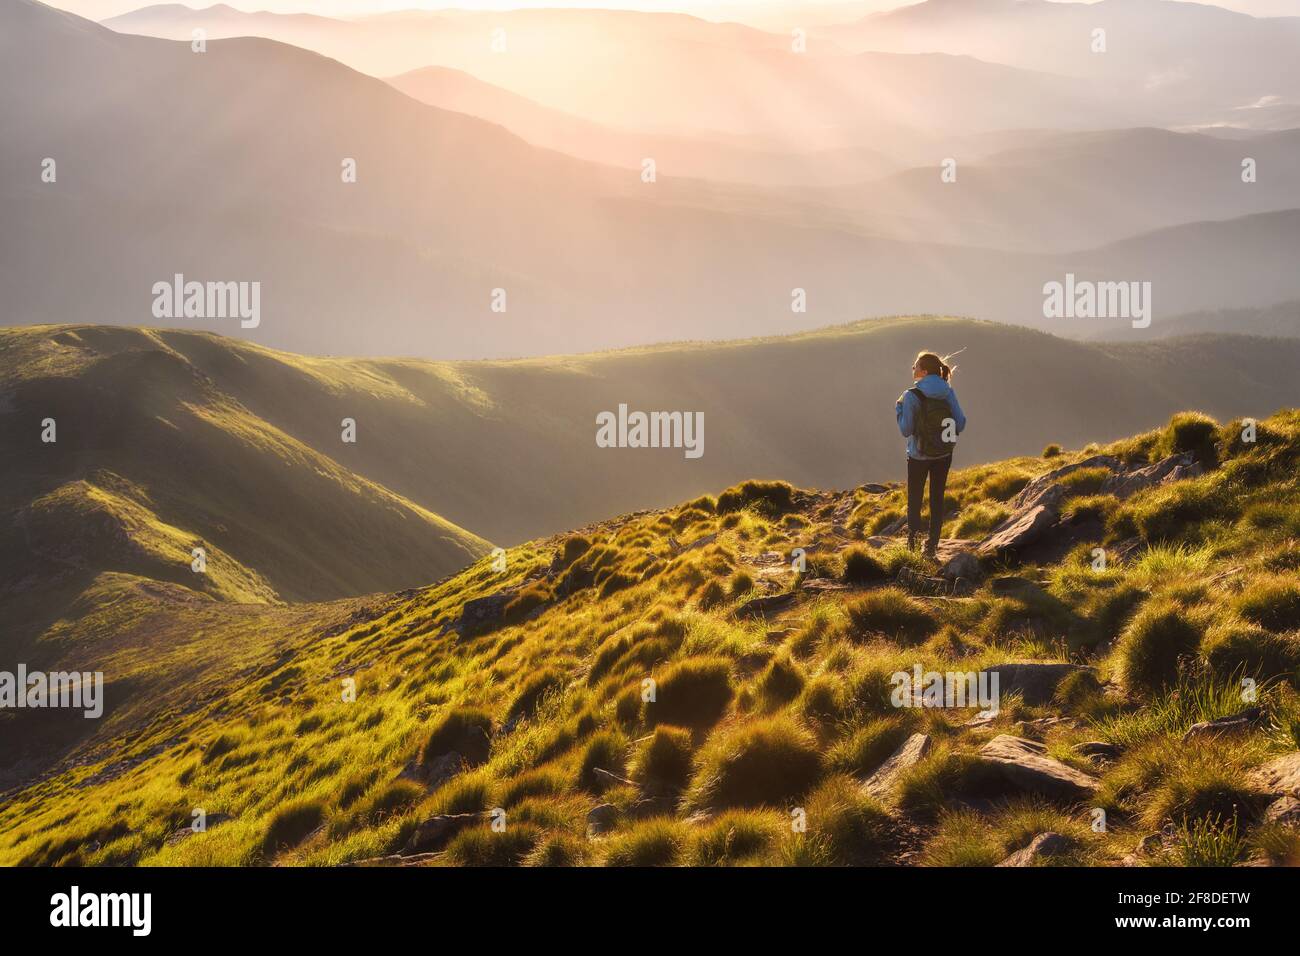 Girl on mountain peak with looking at beautiful mountain valley Stock Photo